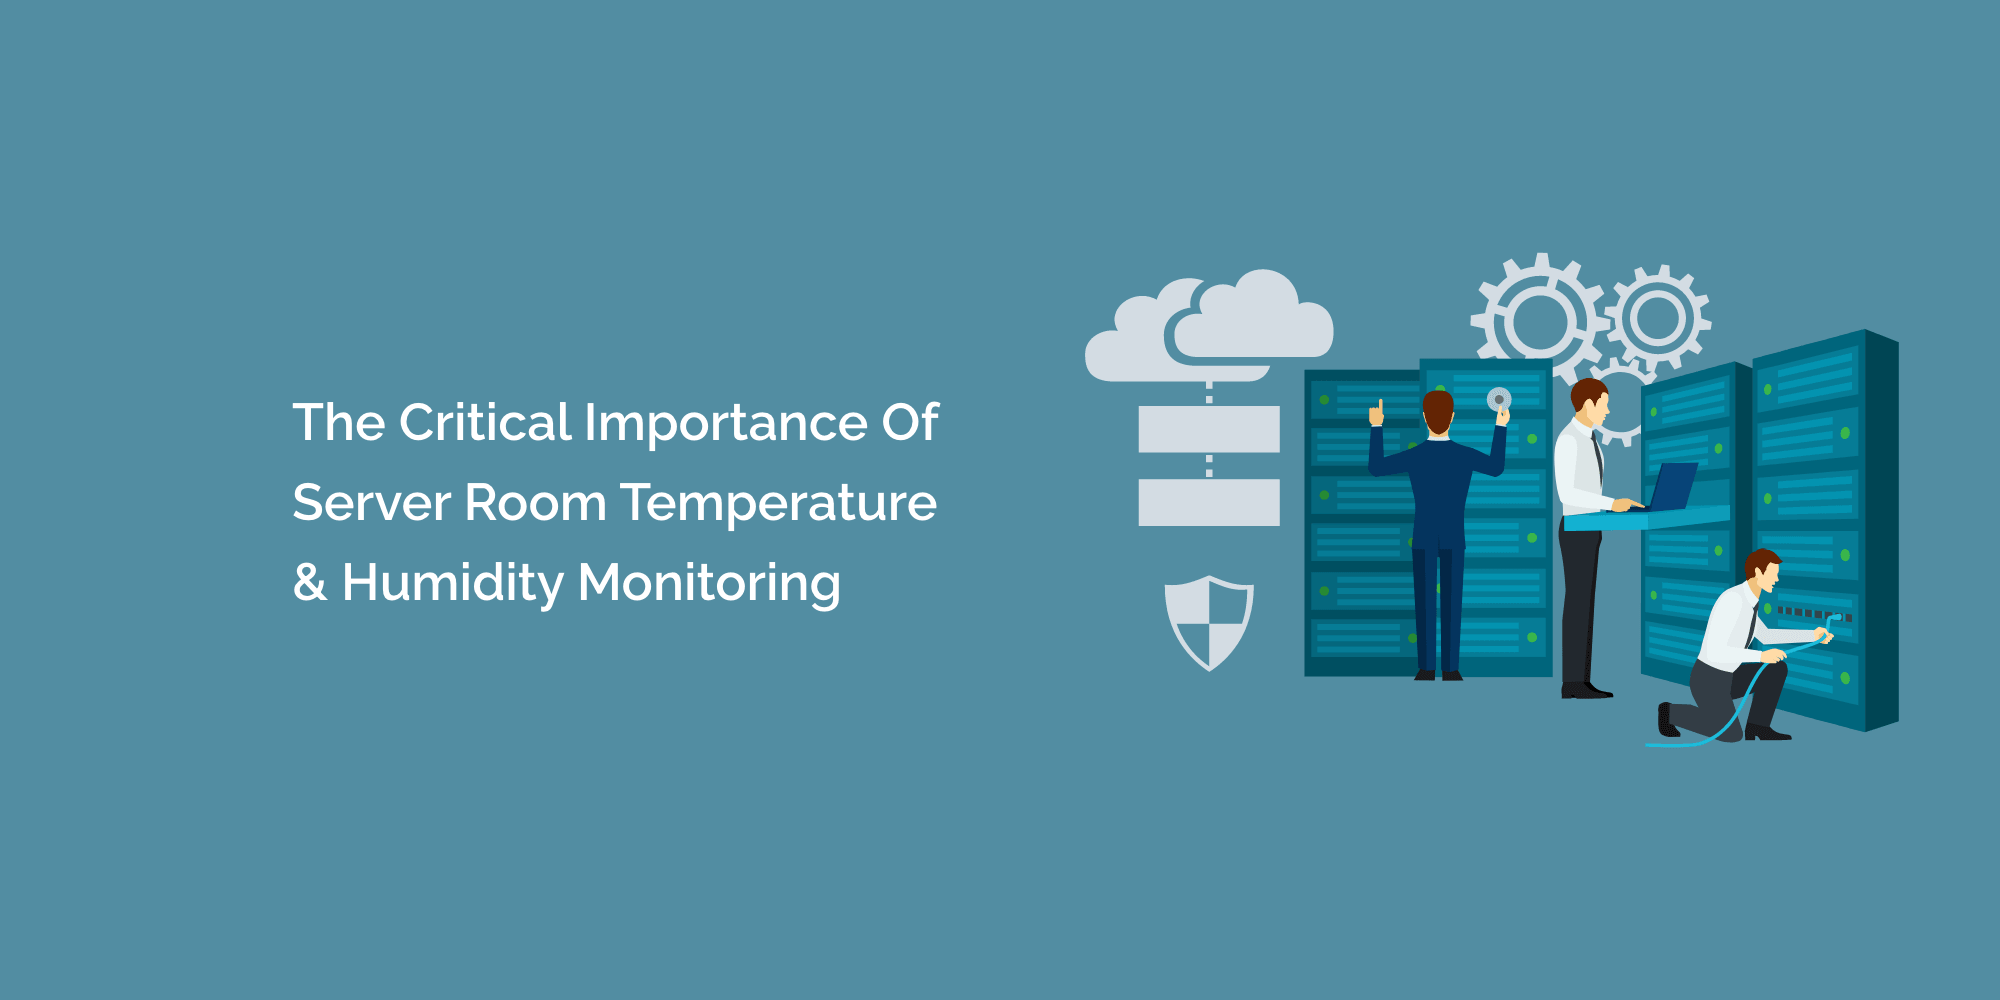 The Critical Importance of Server Room Temperature & Humidity Monitoring